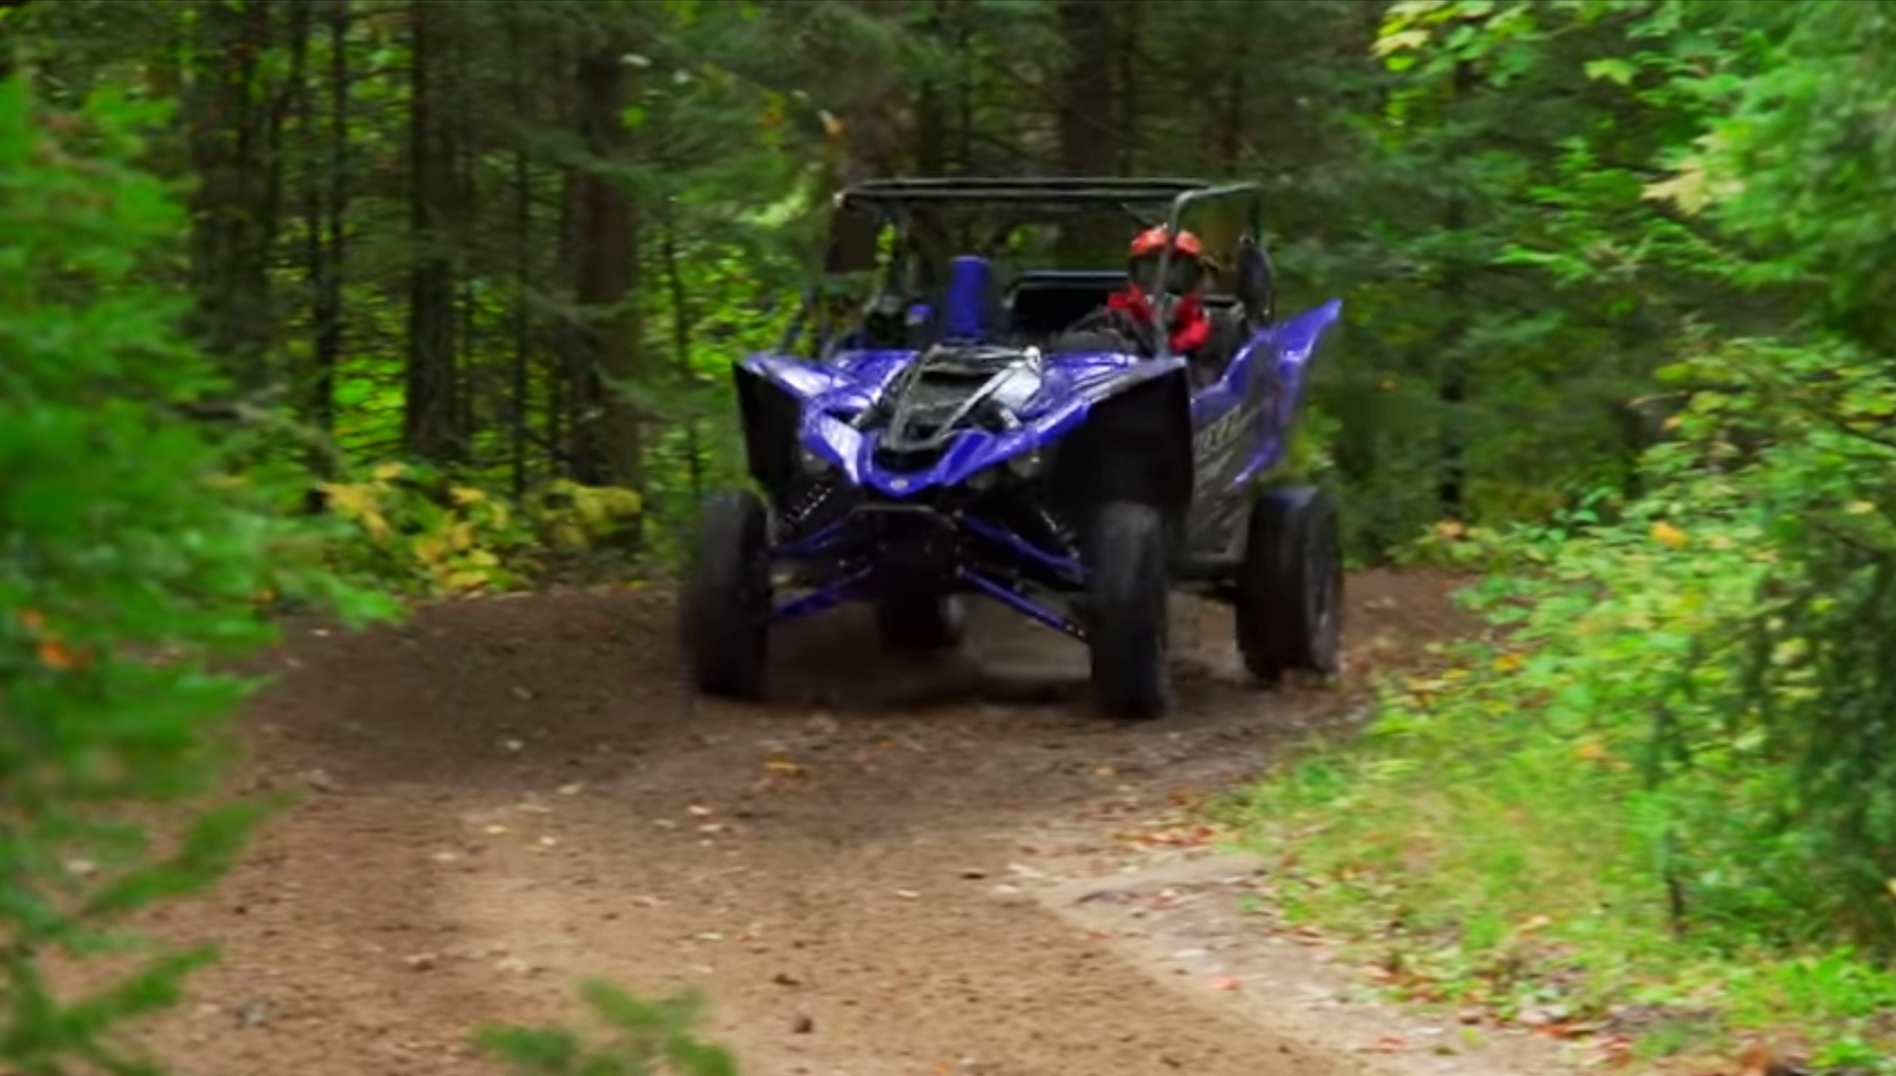 A Blue Yamaha YXZ is being driven through a green forest road.